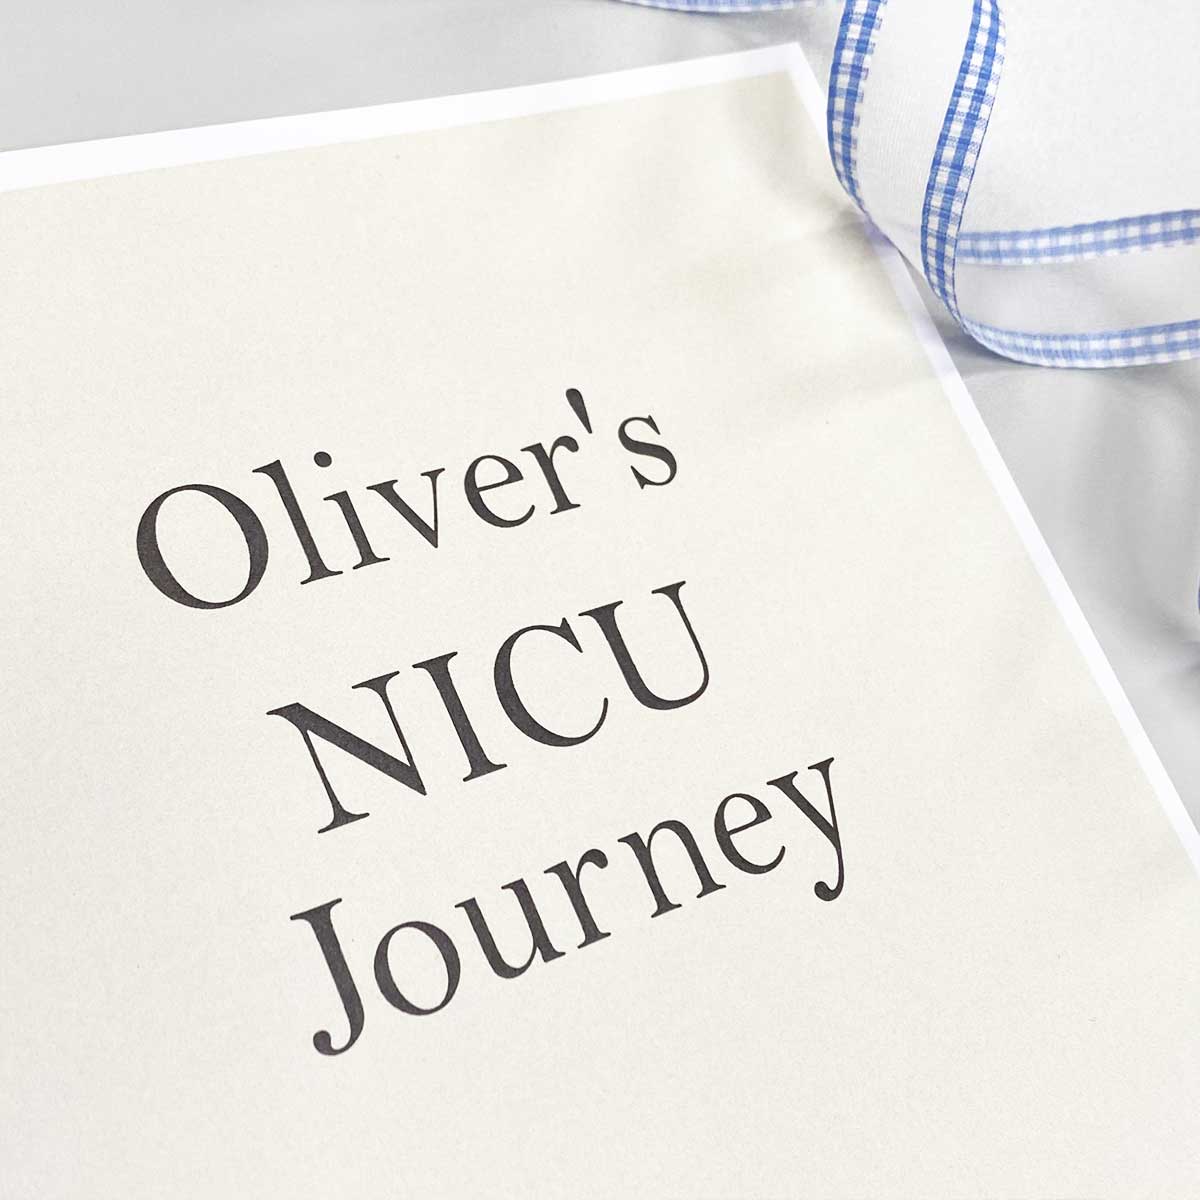 NICU (Neo-natal Intensive Care Unit) Special Care Record Book Journal For Premature Babies